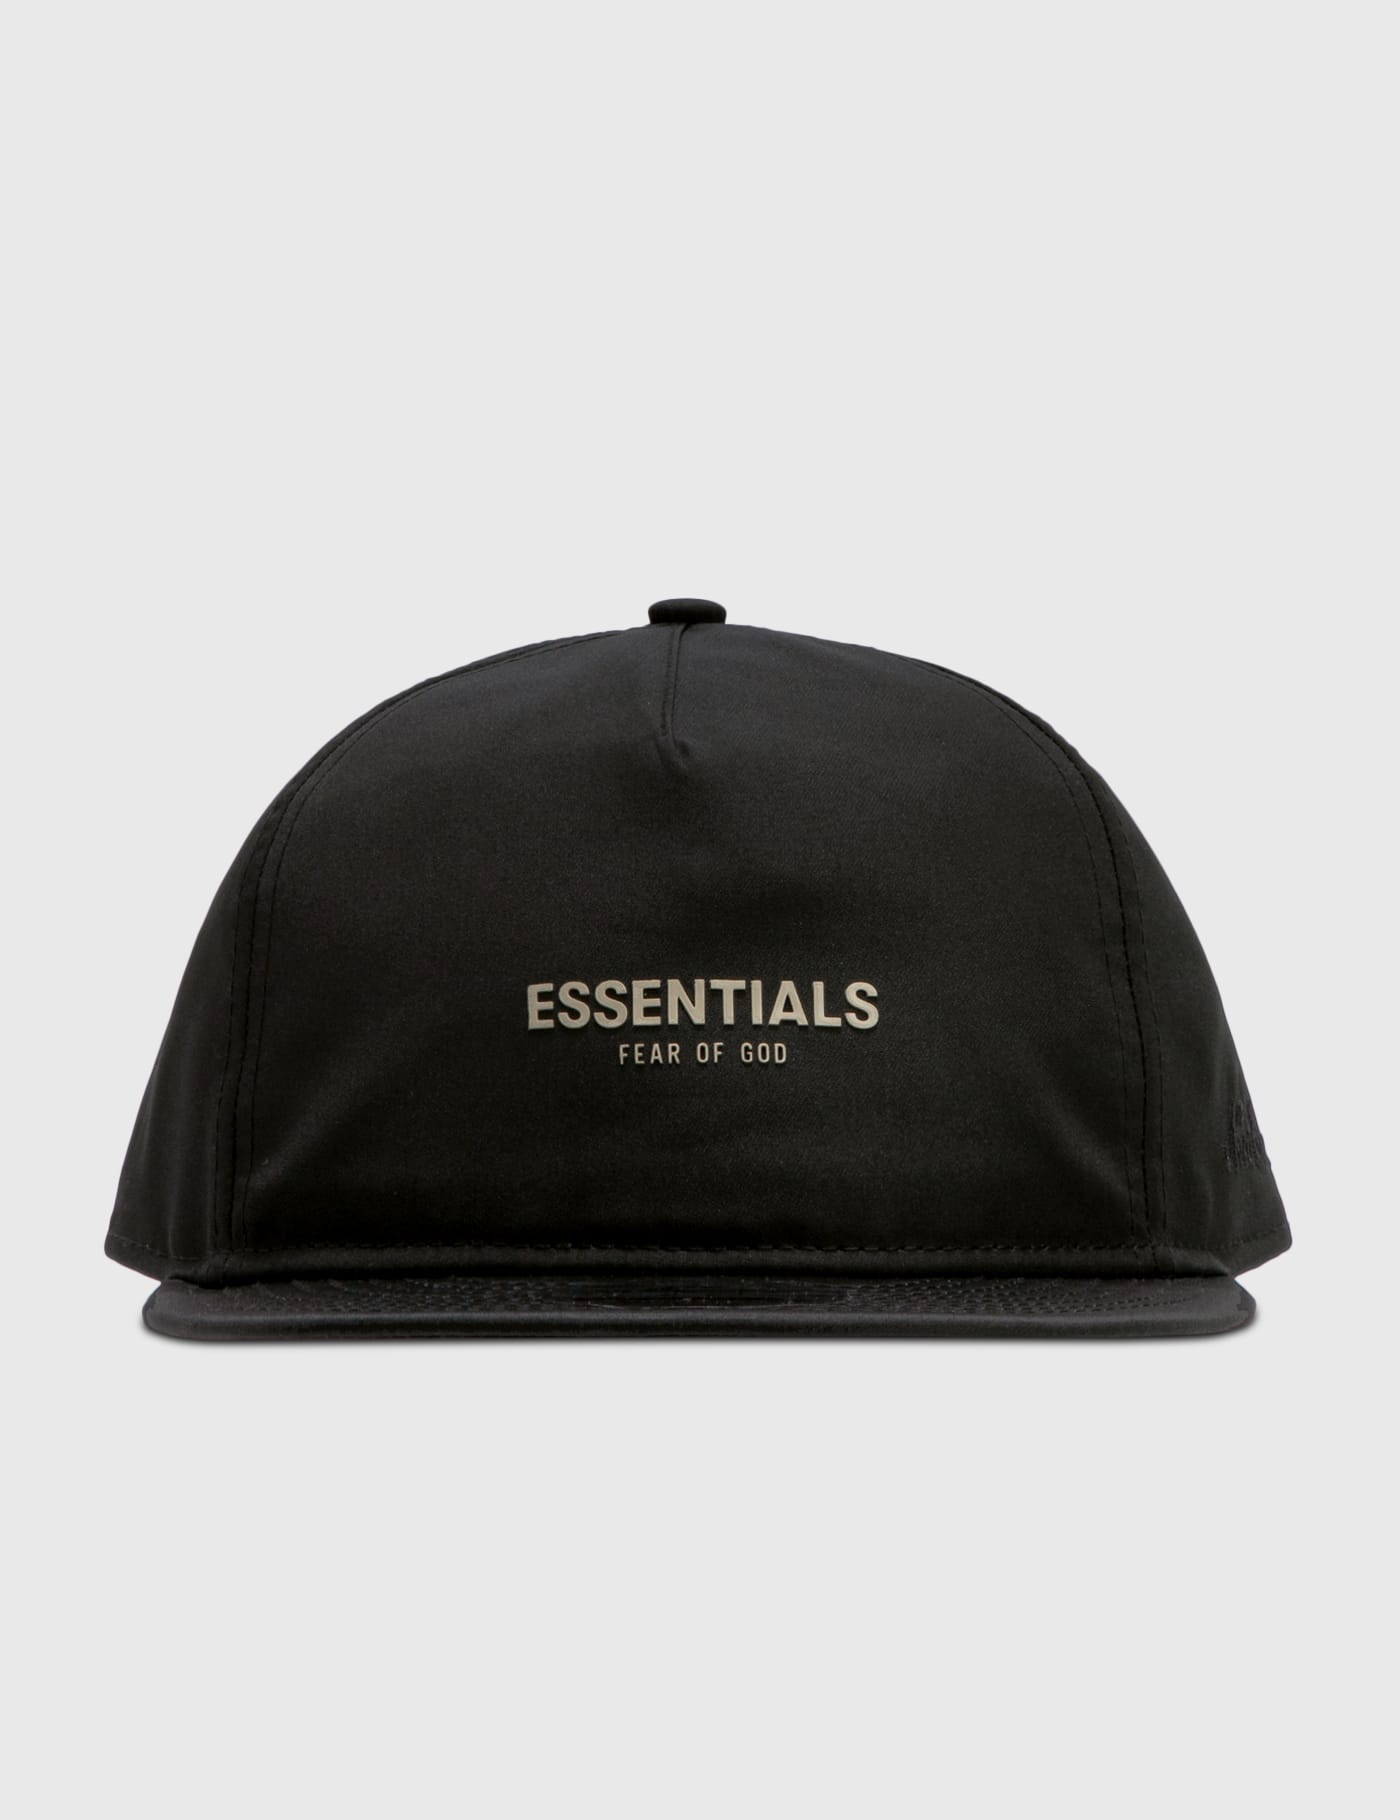 New Era - New Era x Fear of God Essentials Retro Crown 9FIFTY Strapback Cap  | HBX - Globally Curated Fashion and Lifestyle by Hypebeast